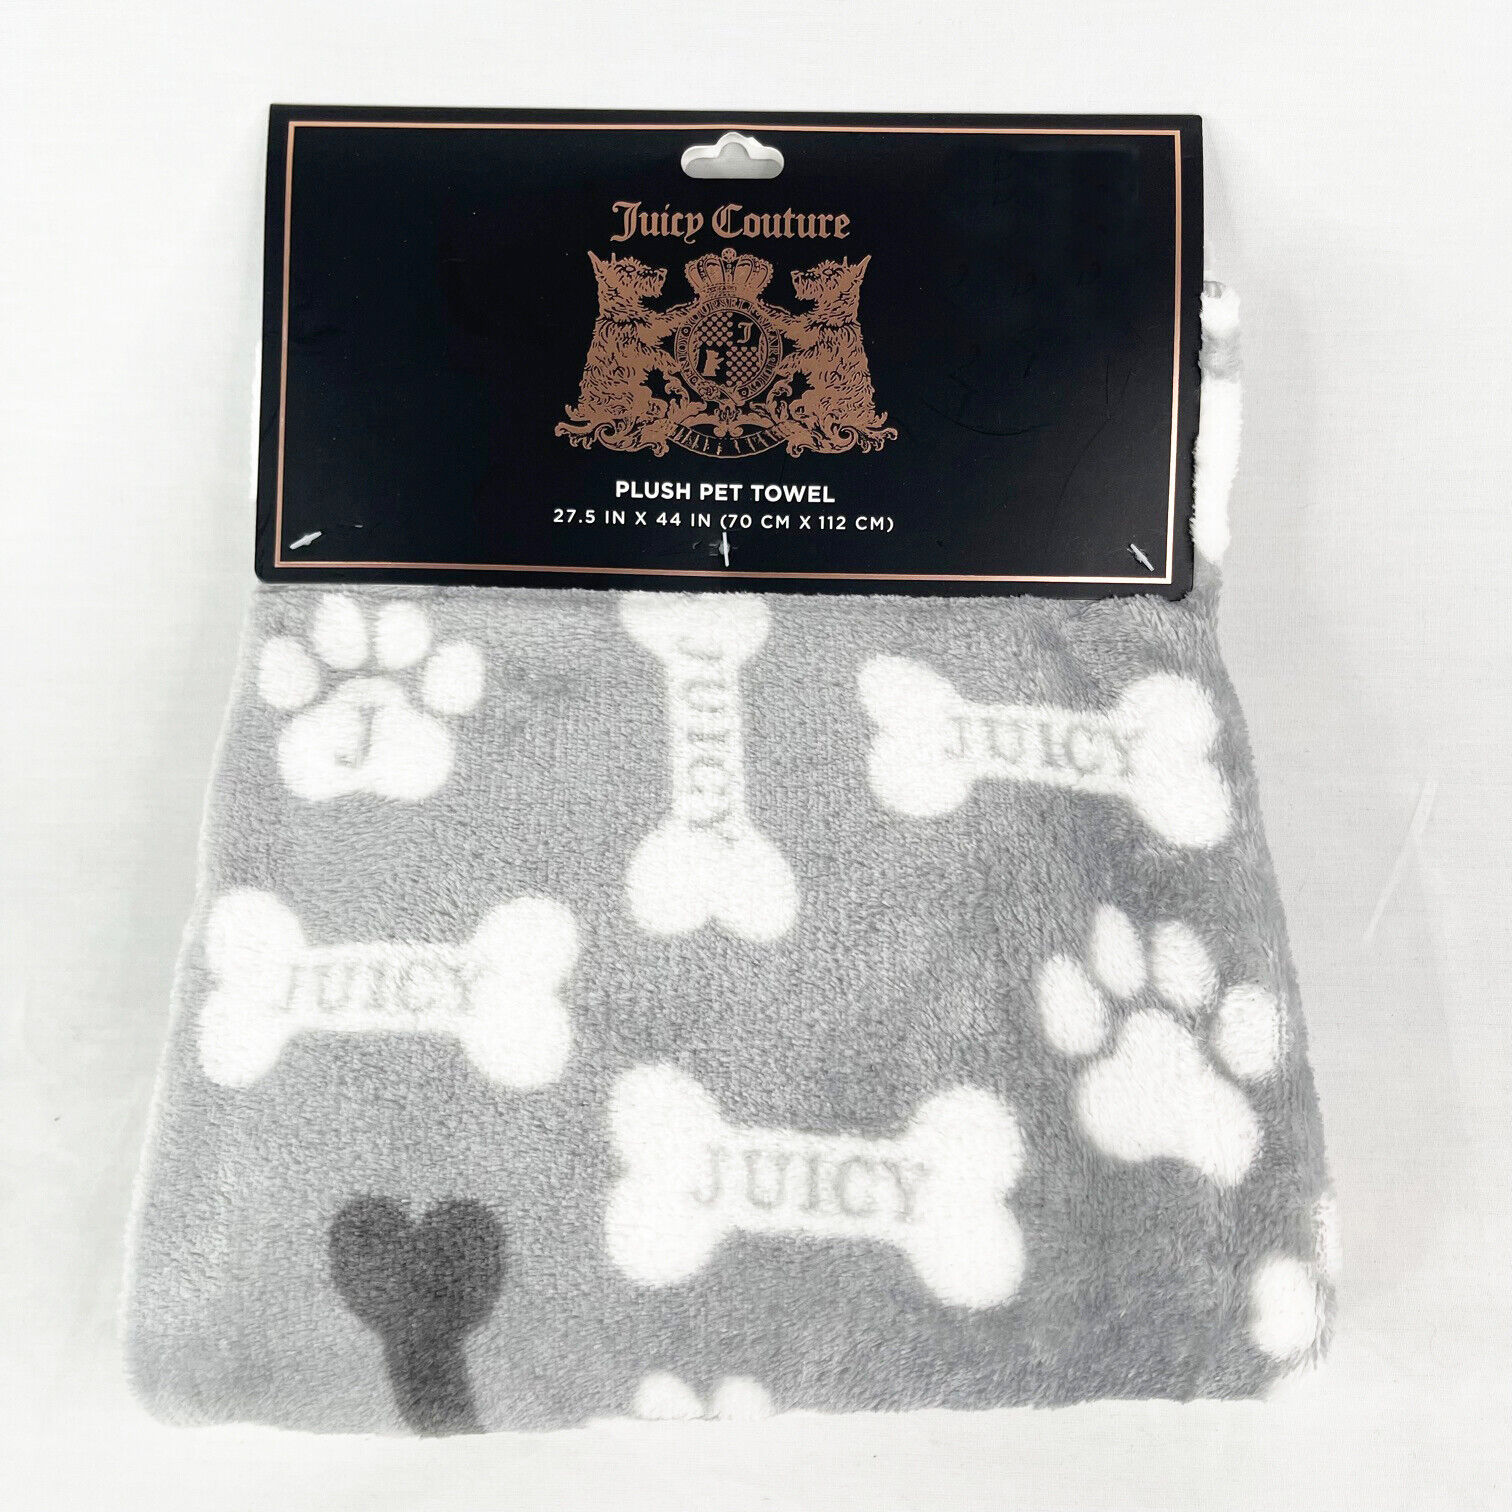 Primary image for JUICY COUTURE PAWS & BONES Dog Super Soft Plush Throw Towel Blanket 